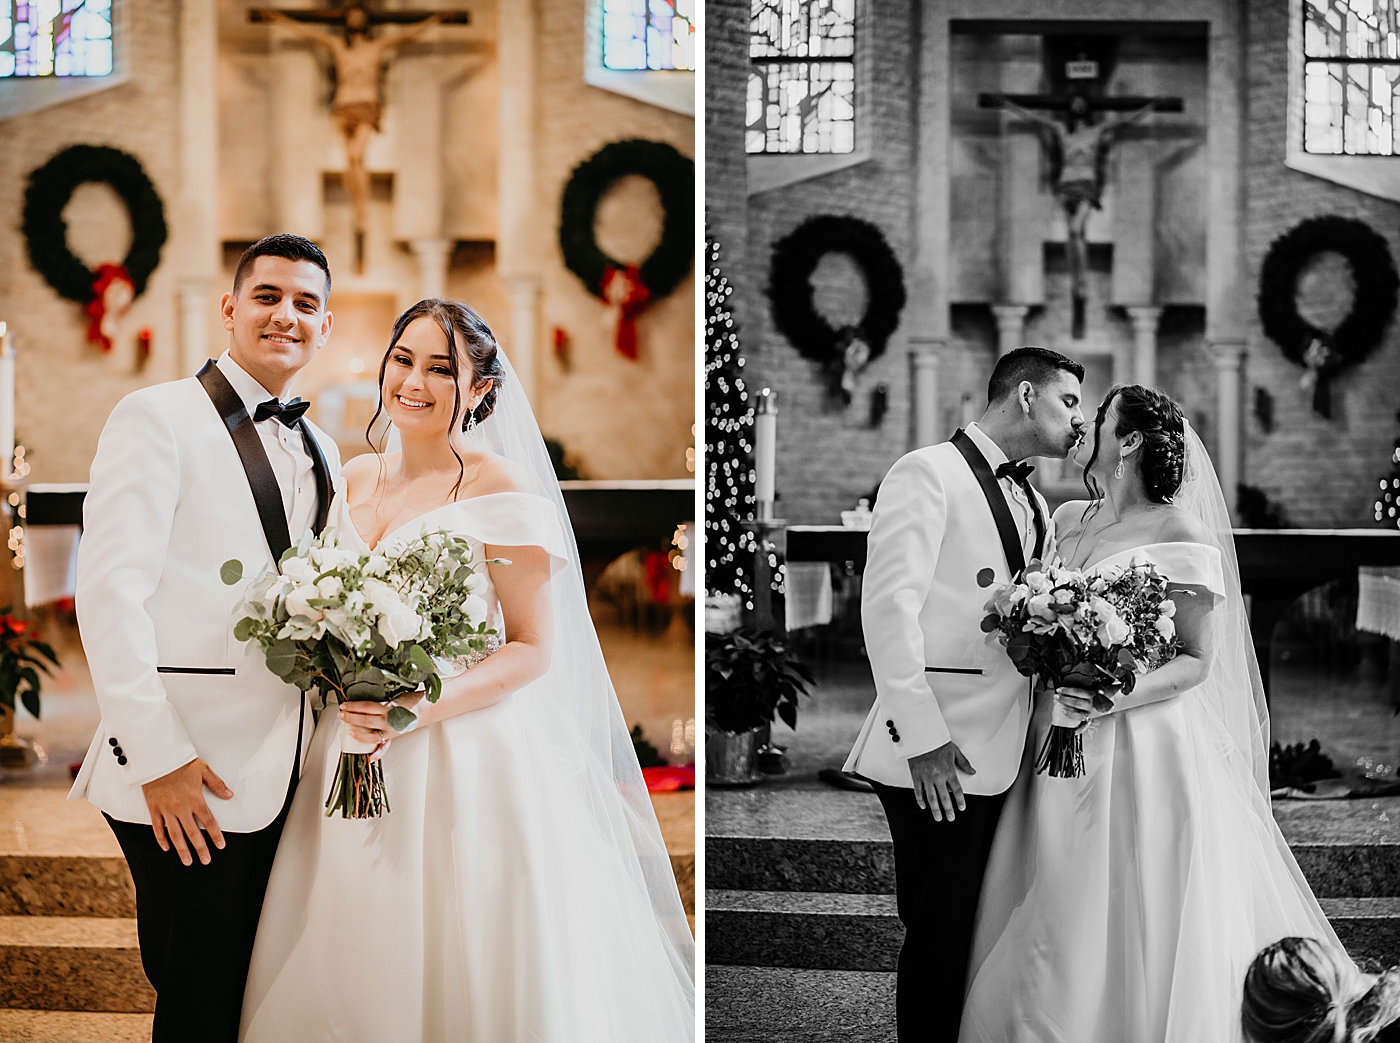 Bride and Groom portrait inside church Lavan Venue Wedding Photography captured by South Florida Wedding Photographer Krystal Capone Photography